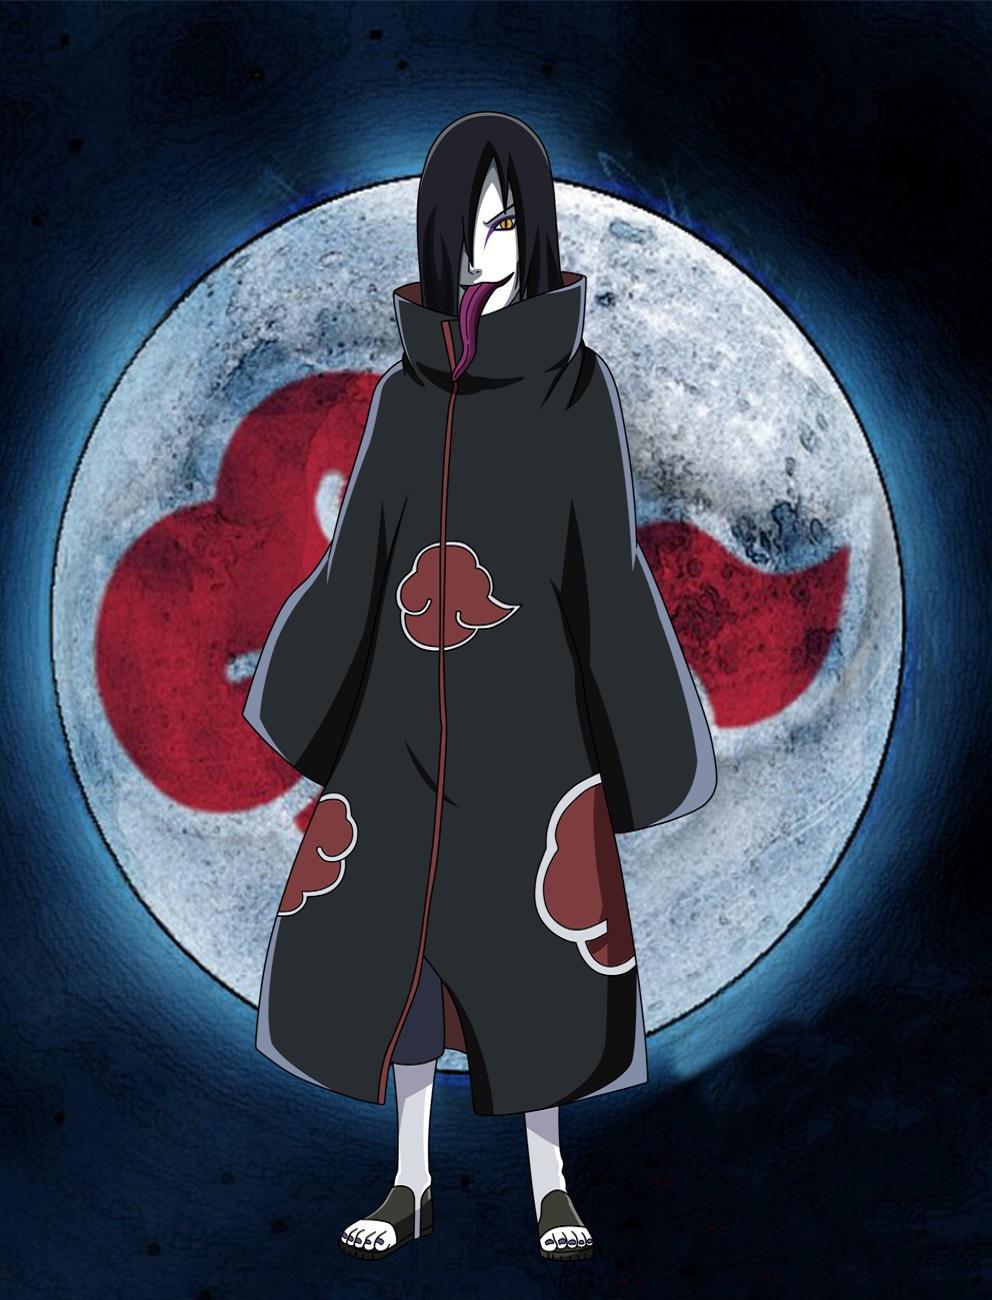 Orochimaru for Android